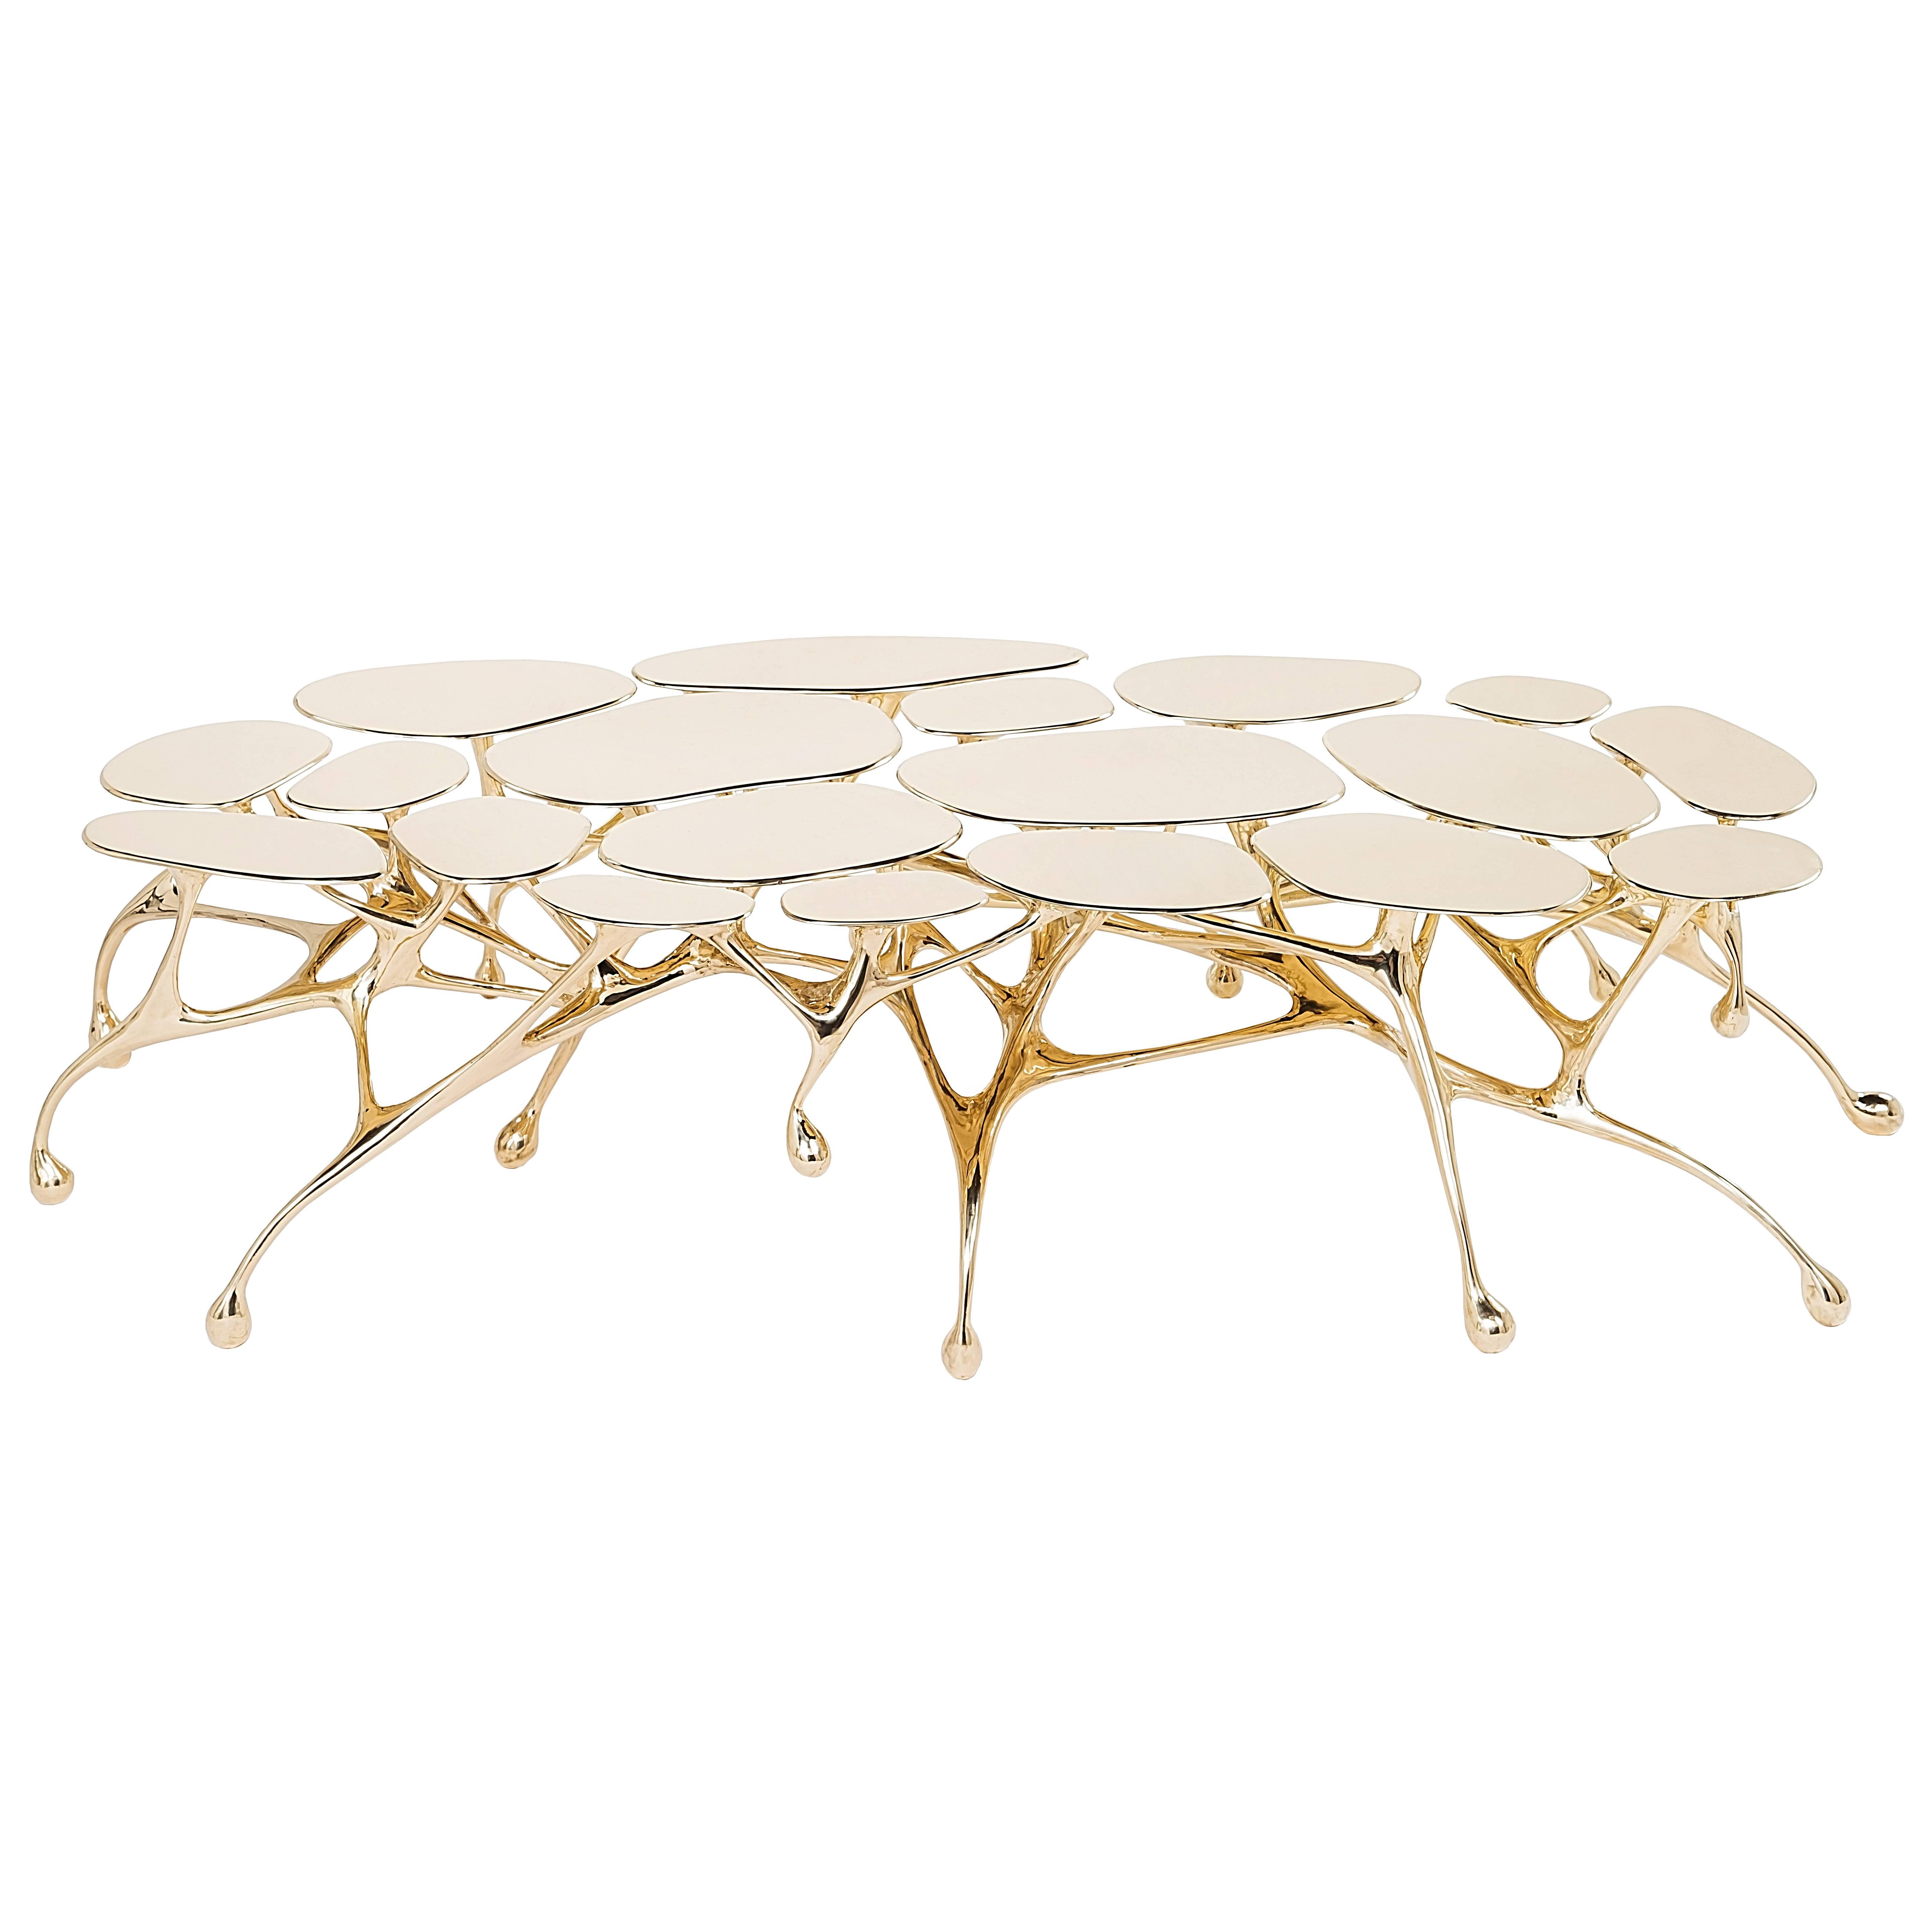 brass coffee table accent zhipeng tan for bronze walking collection gallery all master mixed material decoration ideas parties ikea childrens kitchen christmas runner quilt kits